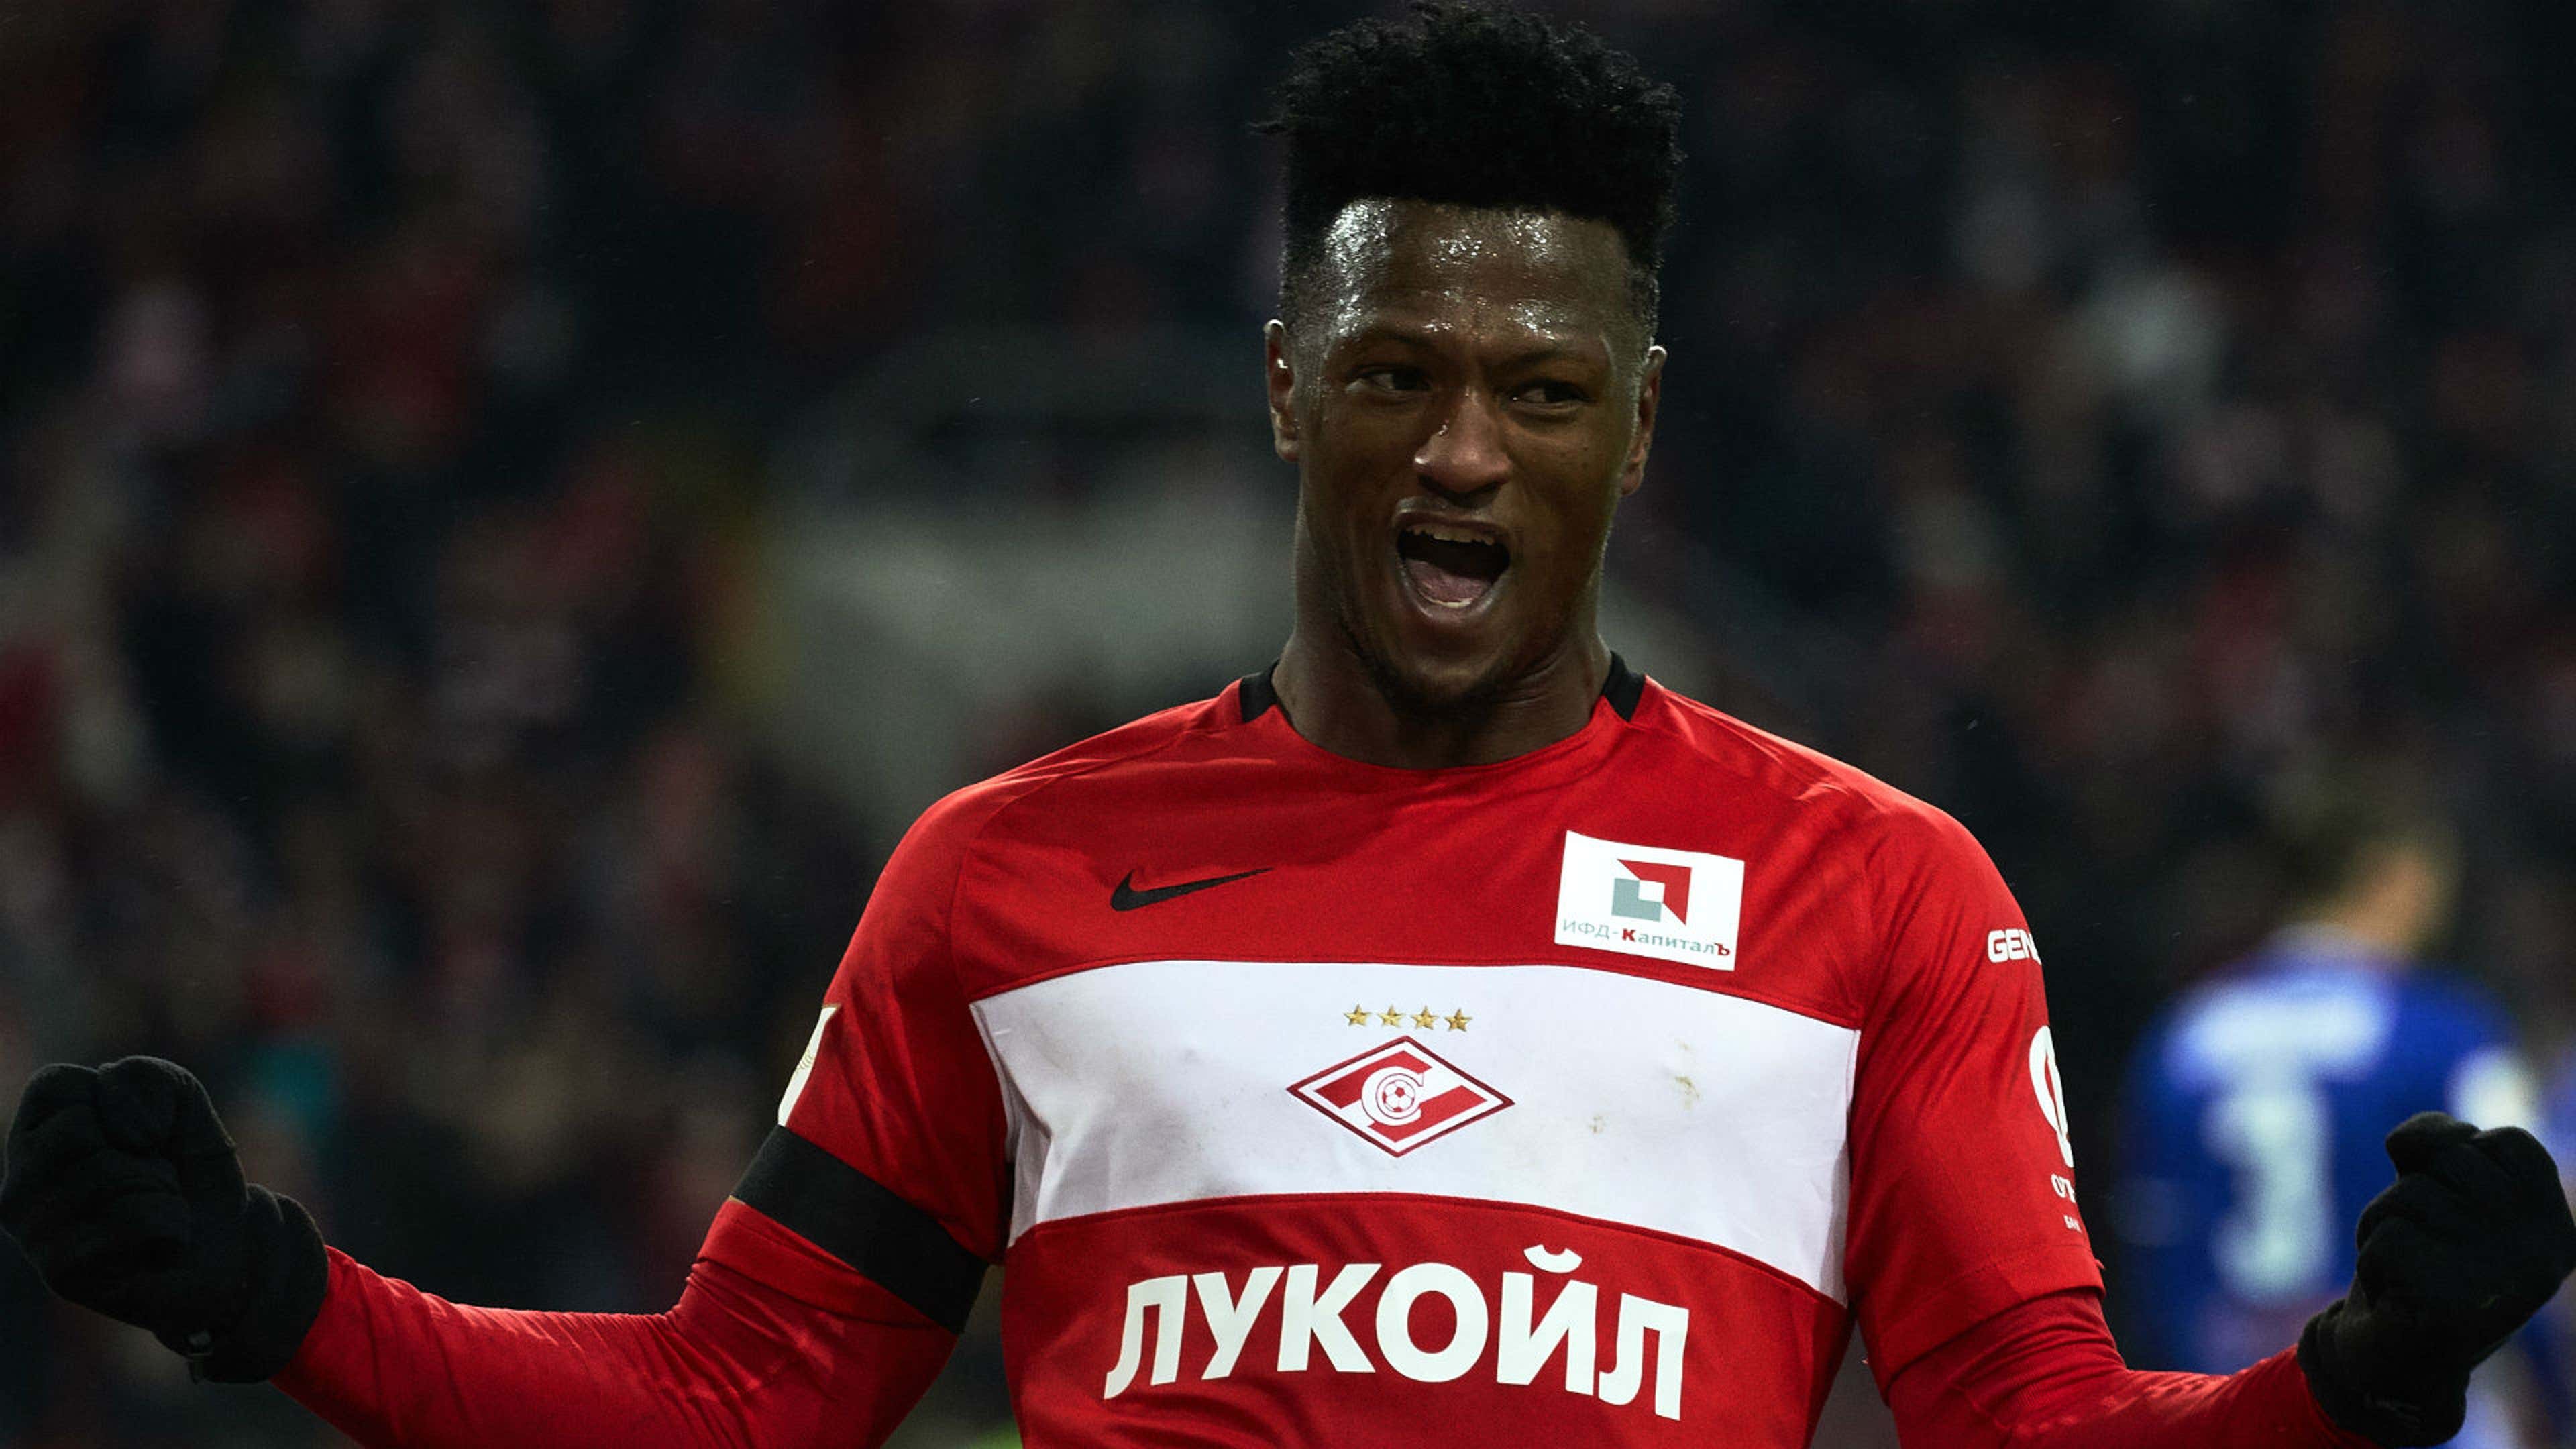 Cape Verde's Ze Luis lifts Russian league title with Spartak Moscow